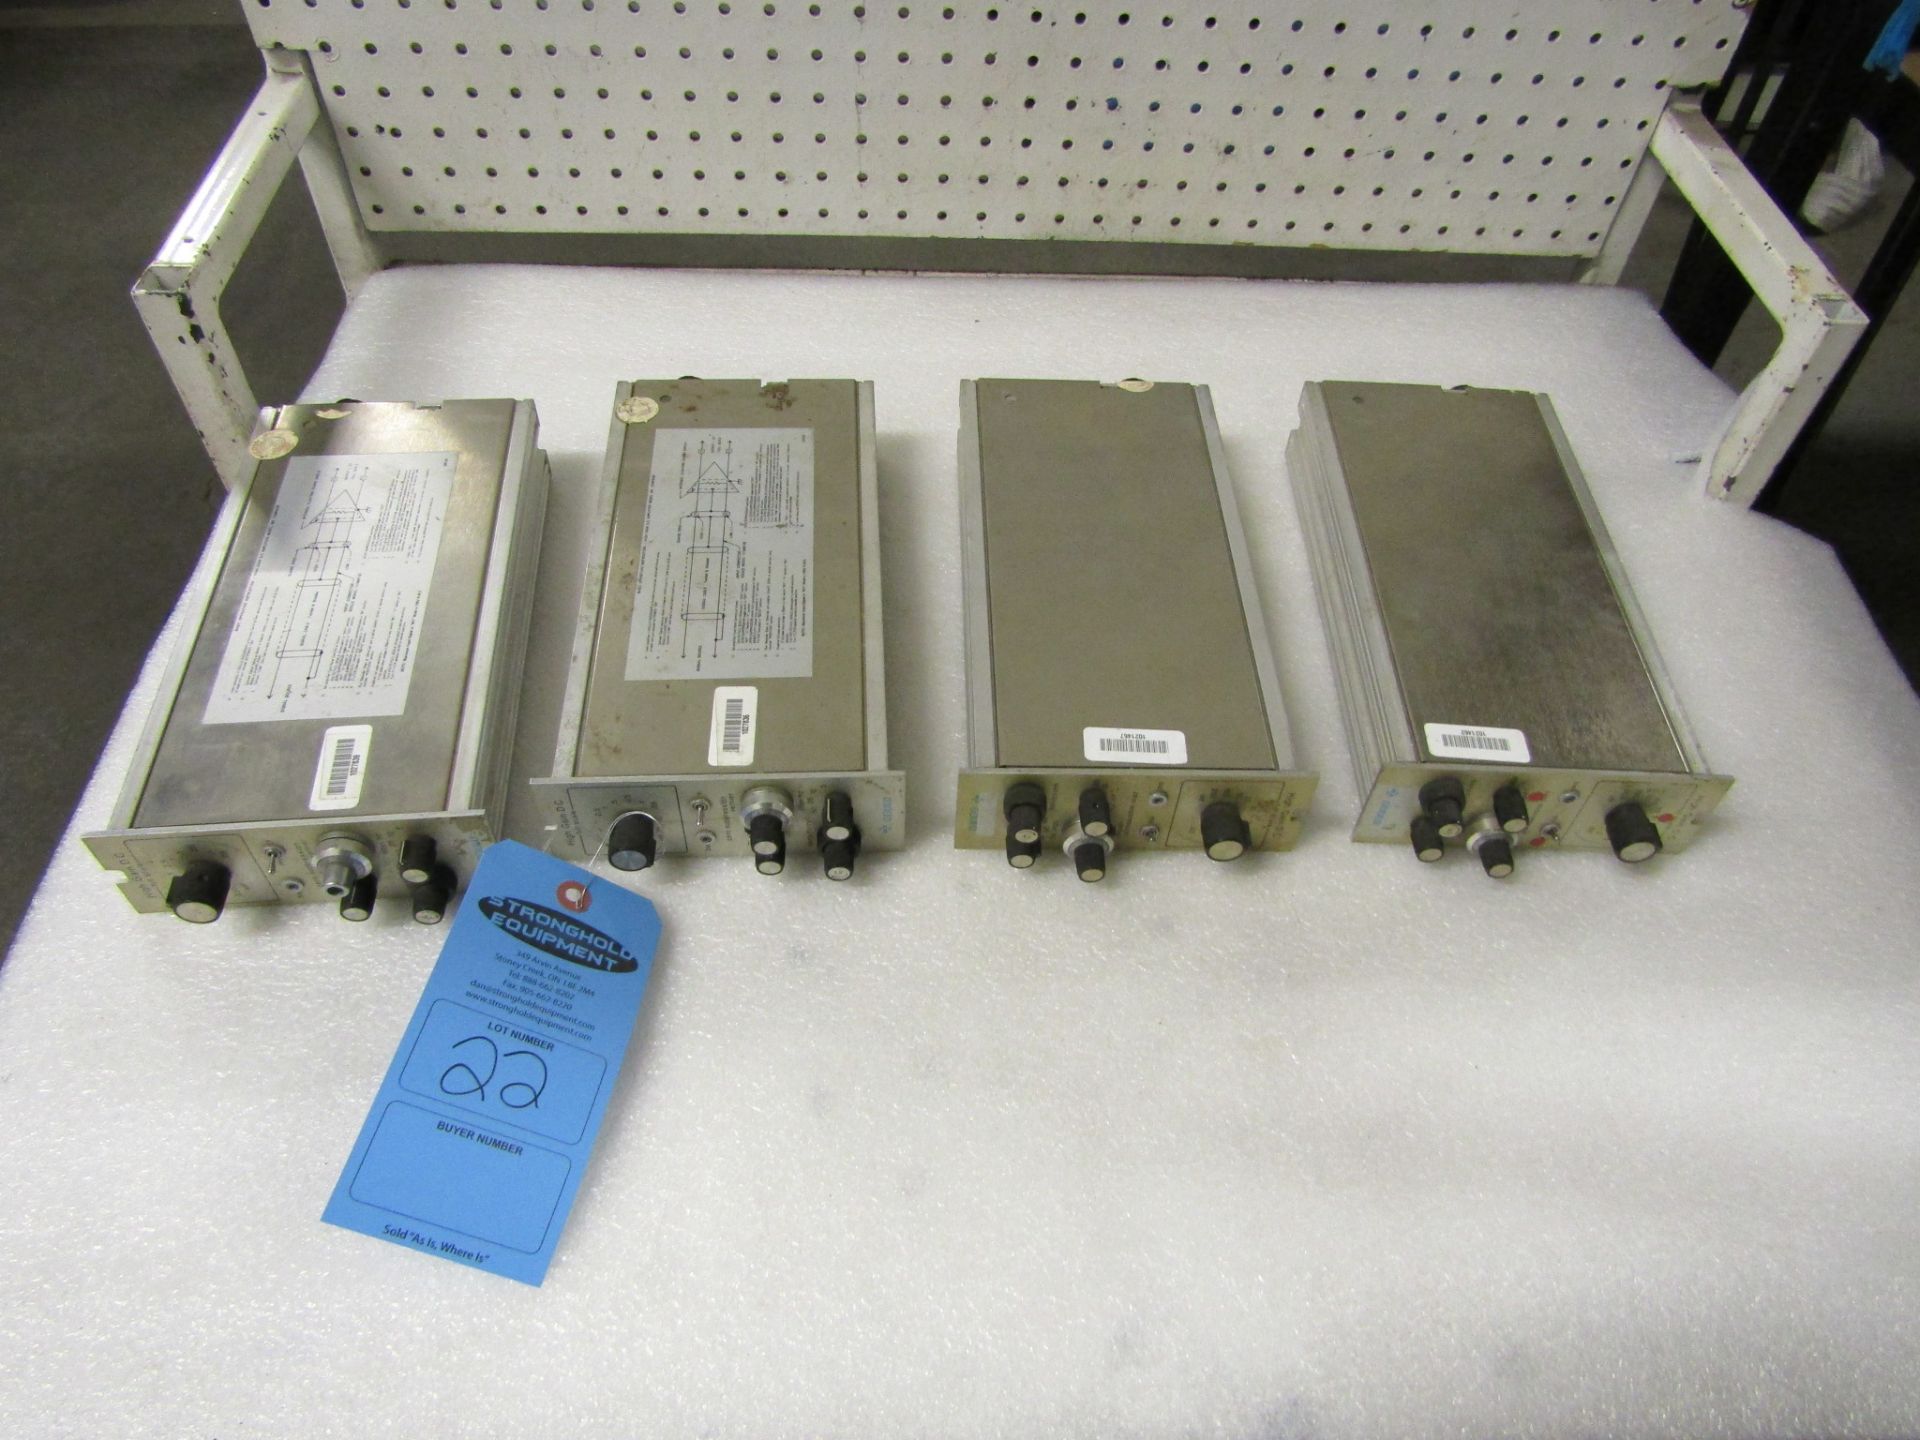 Lot of 4 (4 units) Gould High Gain DC Amplifiers